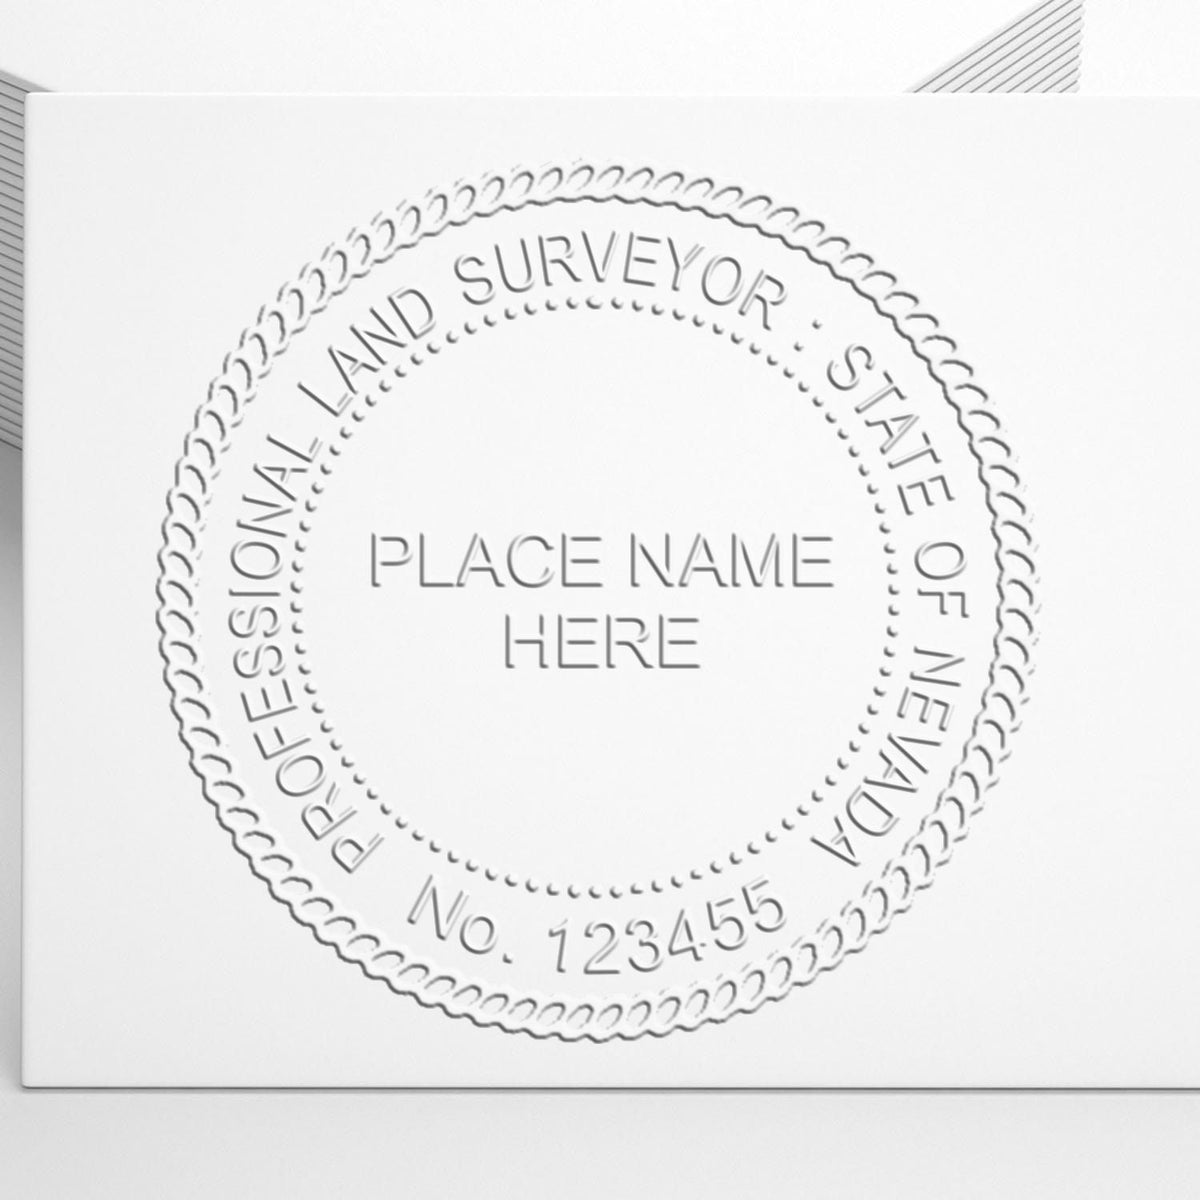 A lifestyle photo showing a stamped image of the Handheld Nevada Land Surveyor Seal on a piece of paper